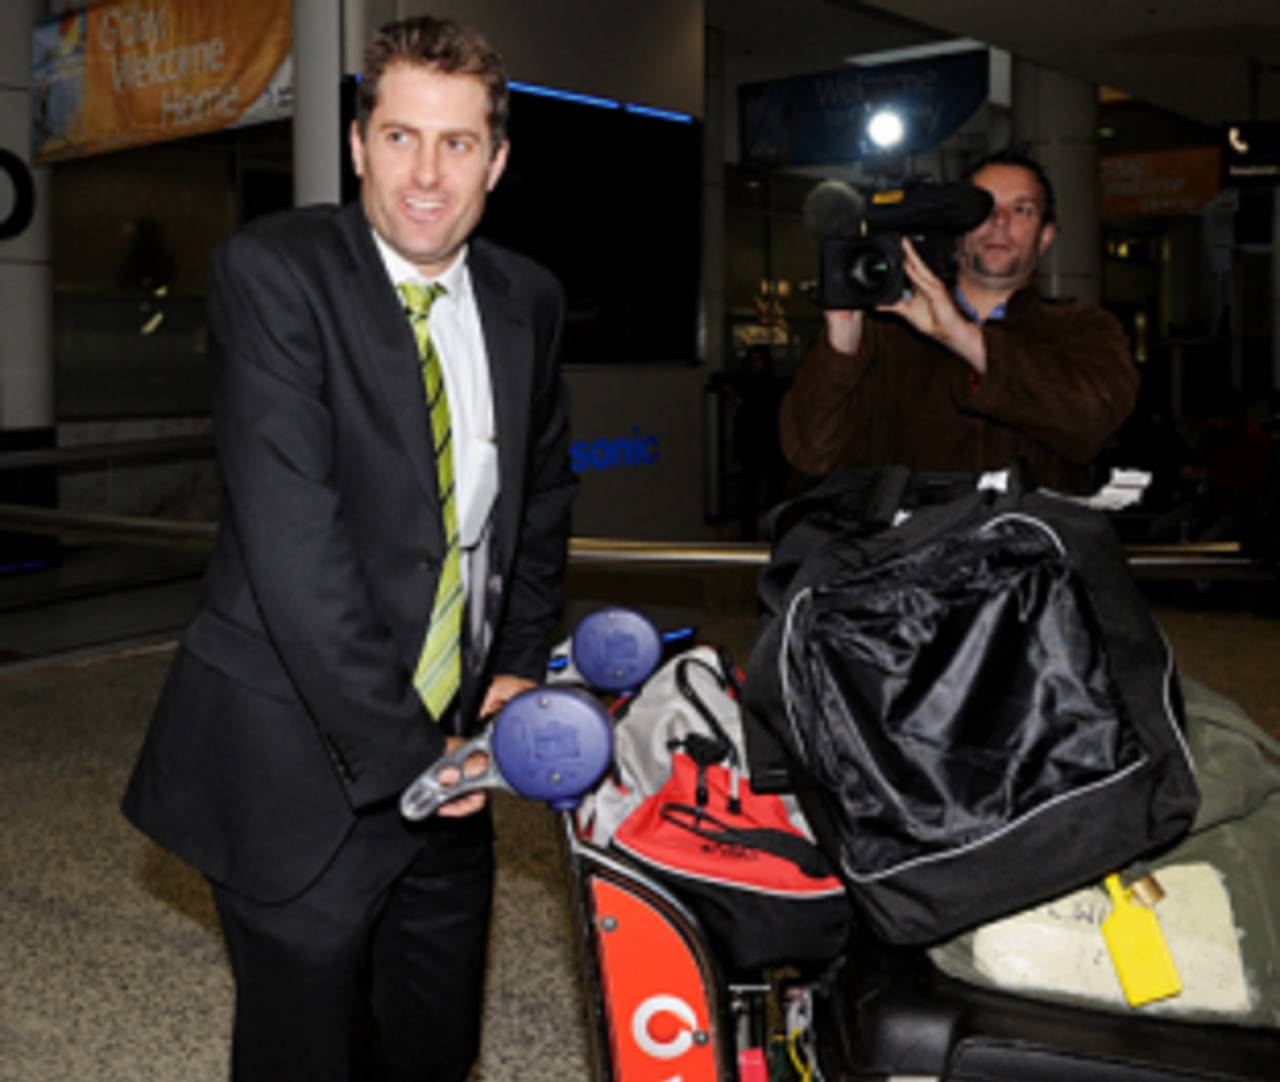 Simon Katich makes his way out of the airport, Sydney, August 26, 2009